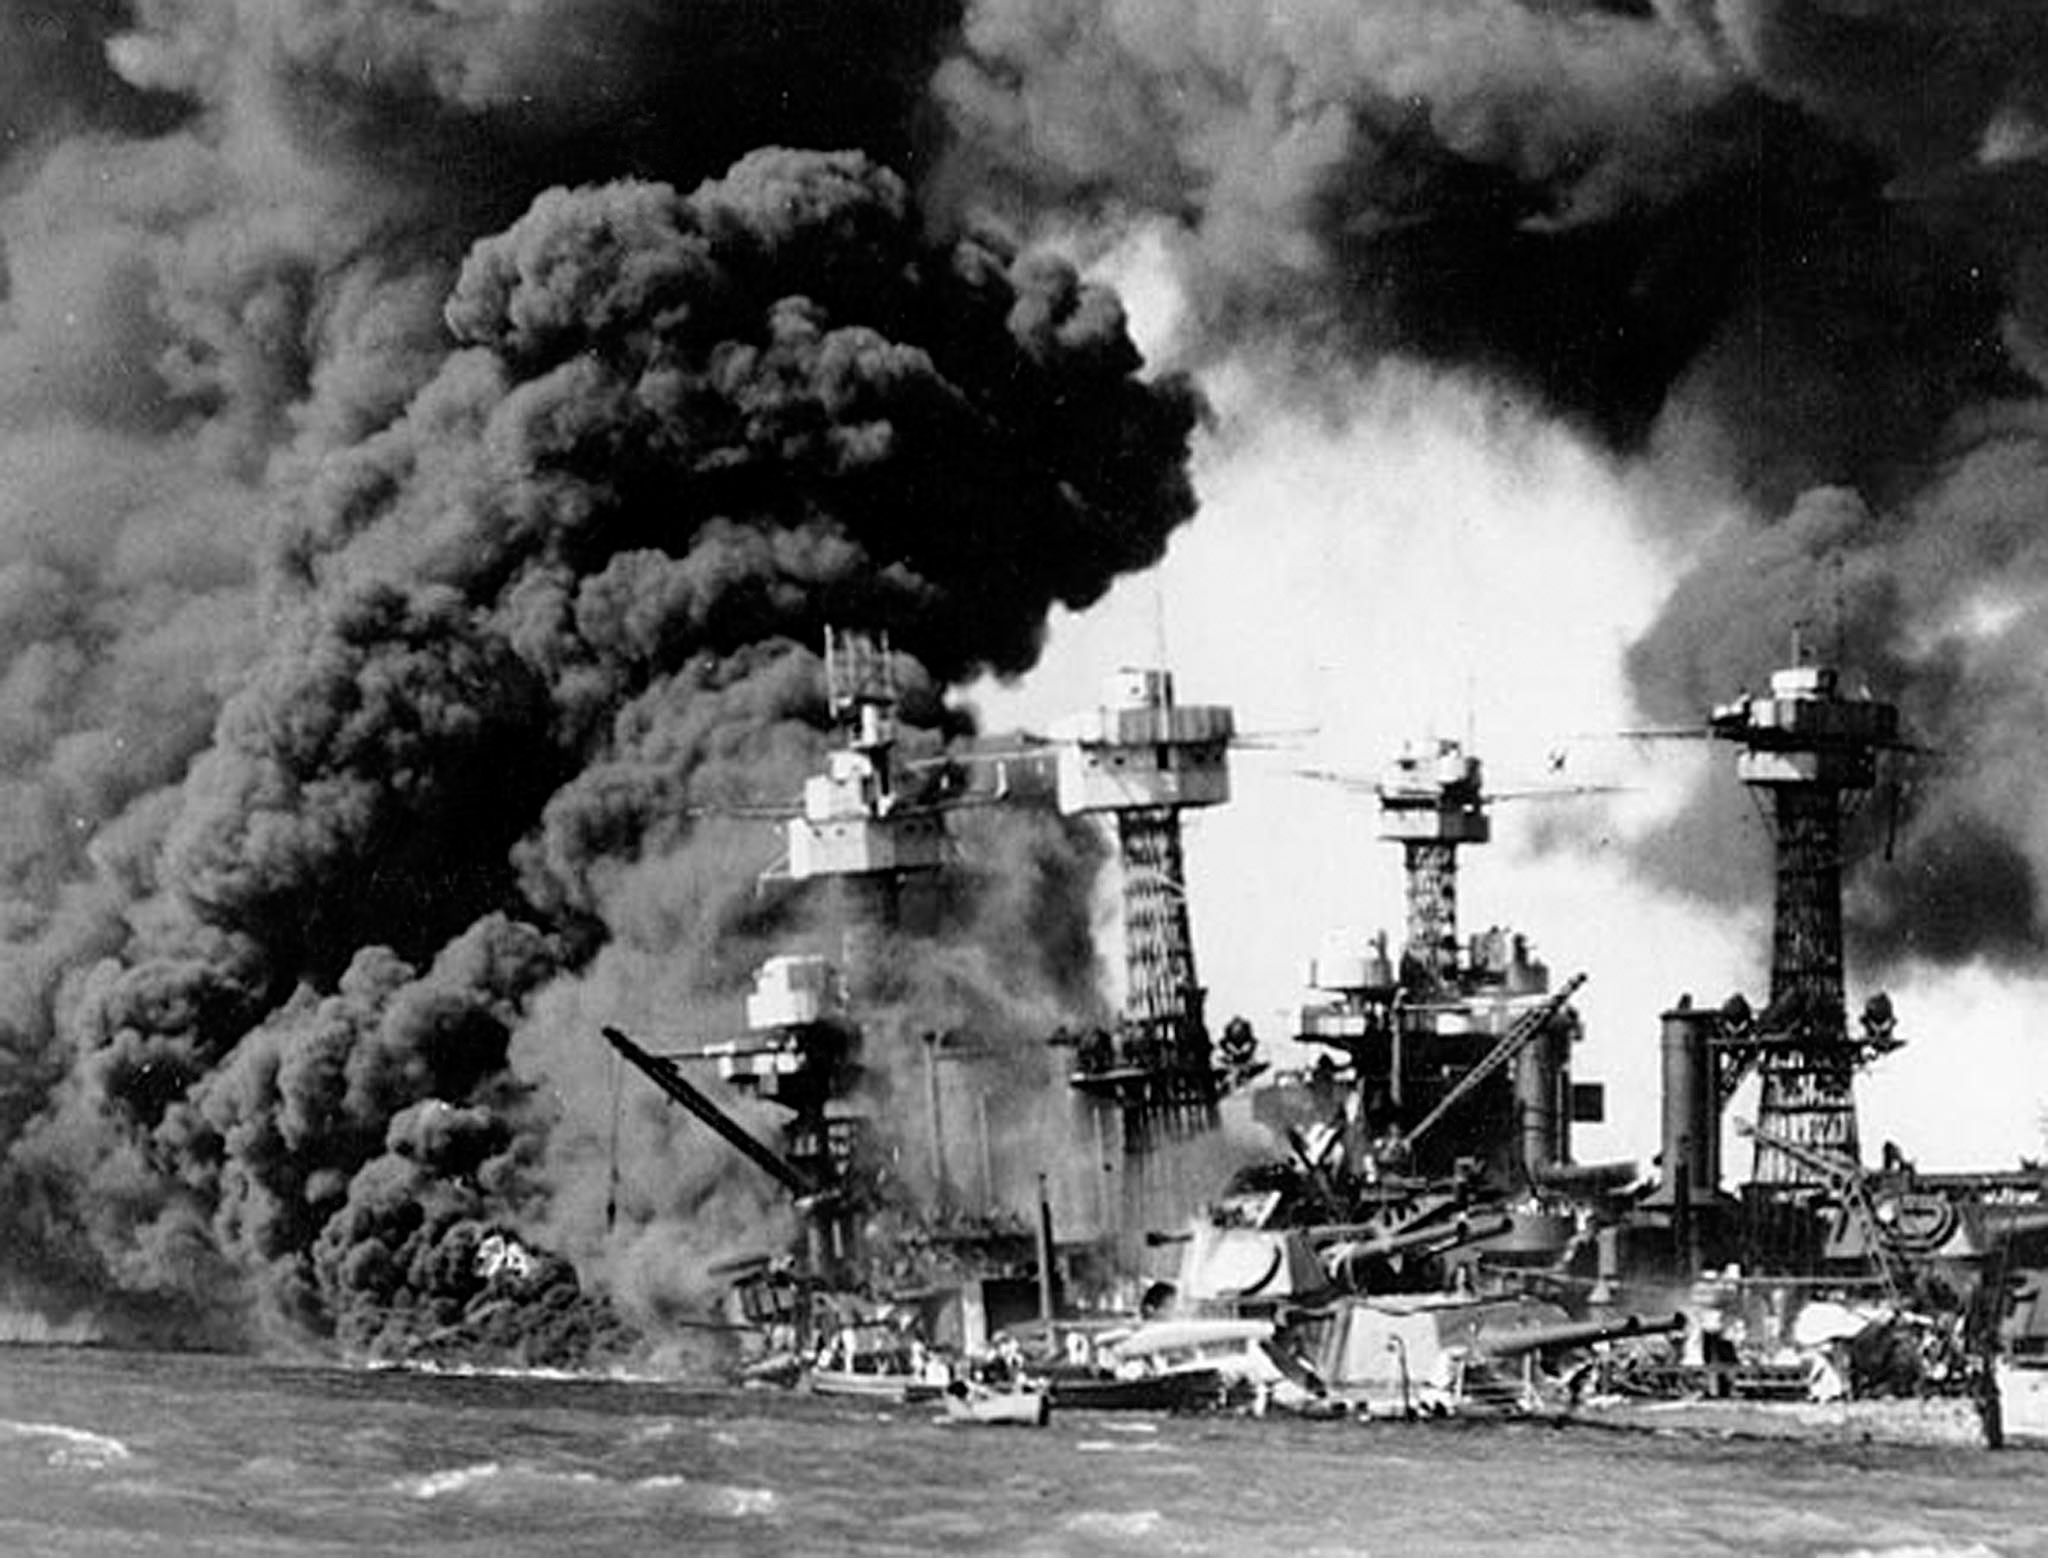 Research on pearl harbor attack